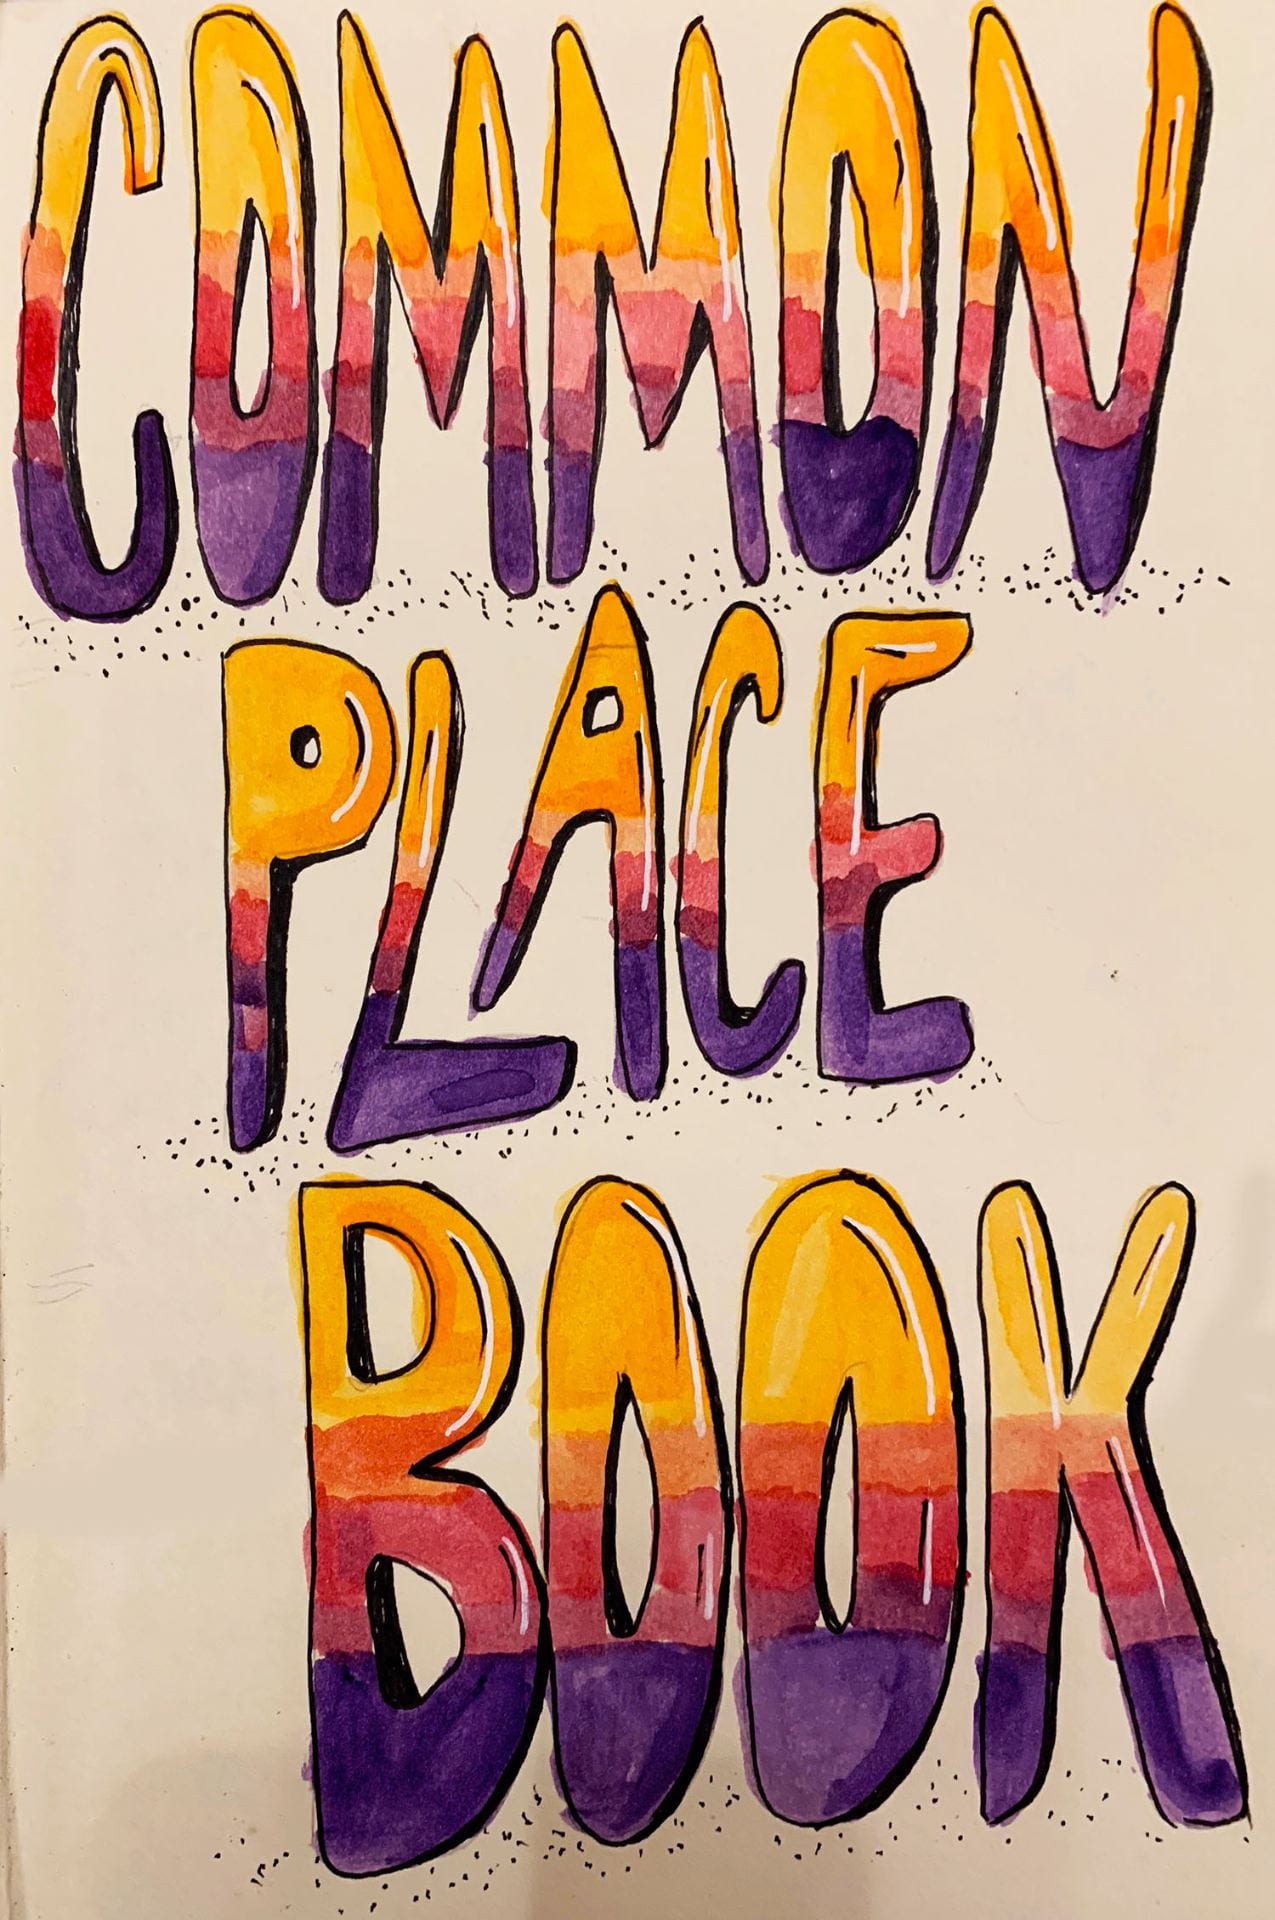 handwritten words in colorful ink: "Common place book"